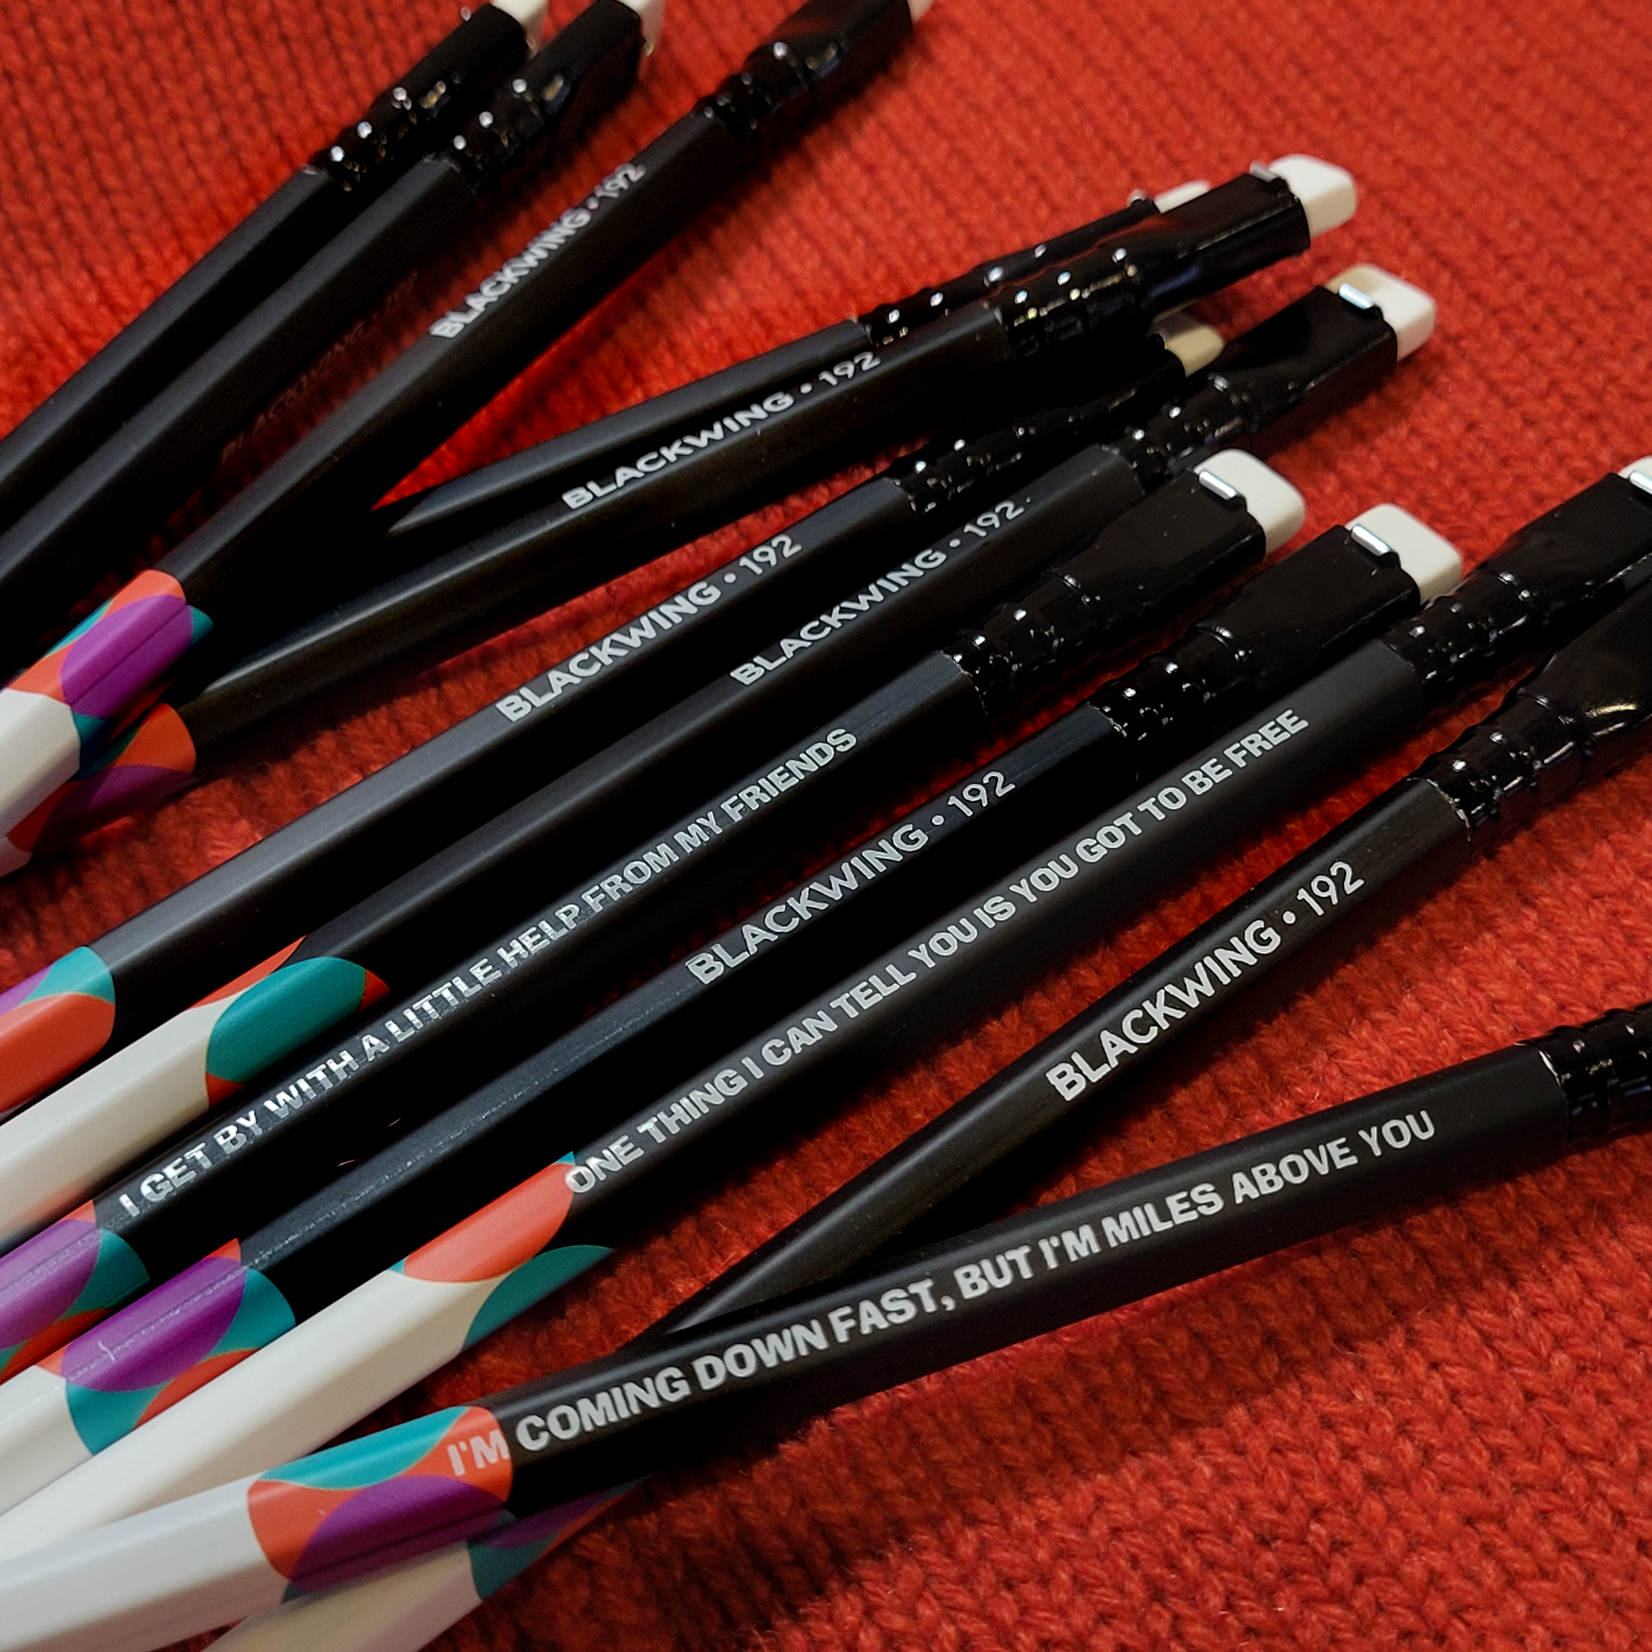 Blackwing Blackwing: Volumes (12 Limited Edition Pencils)